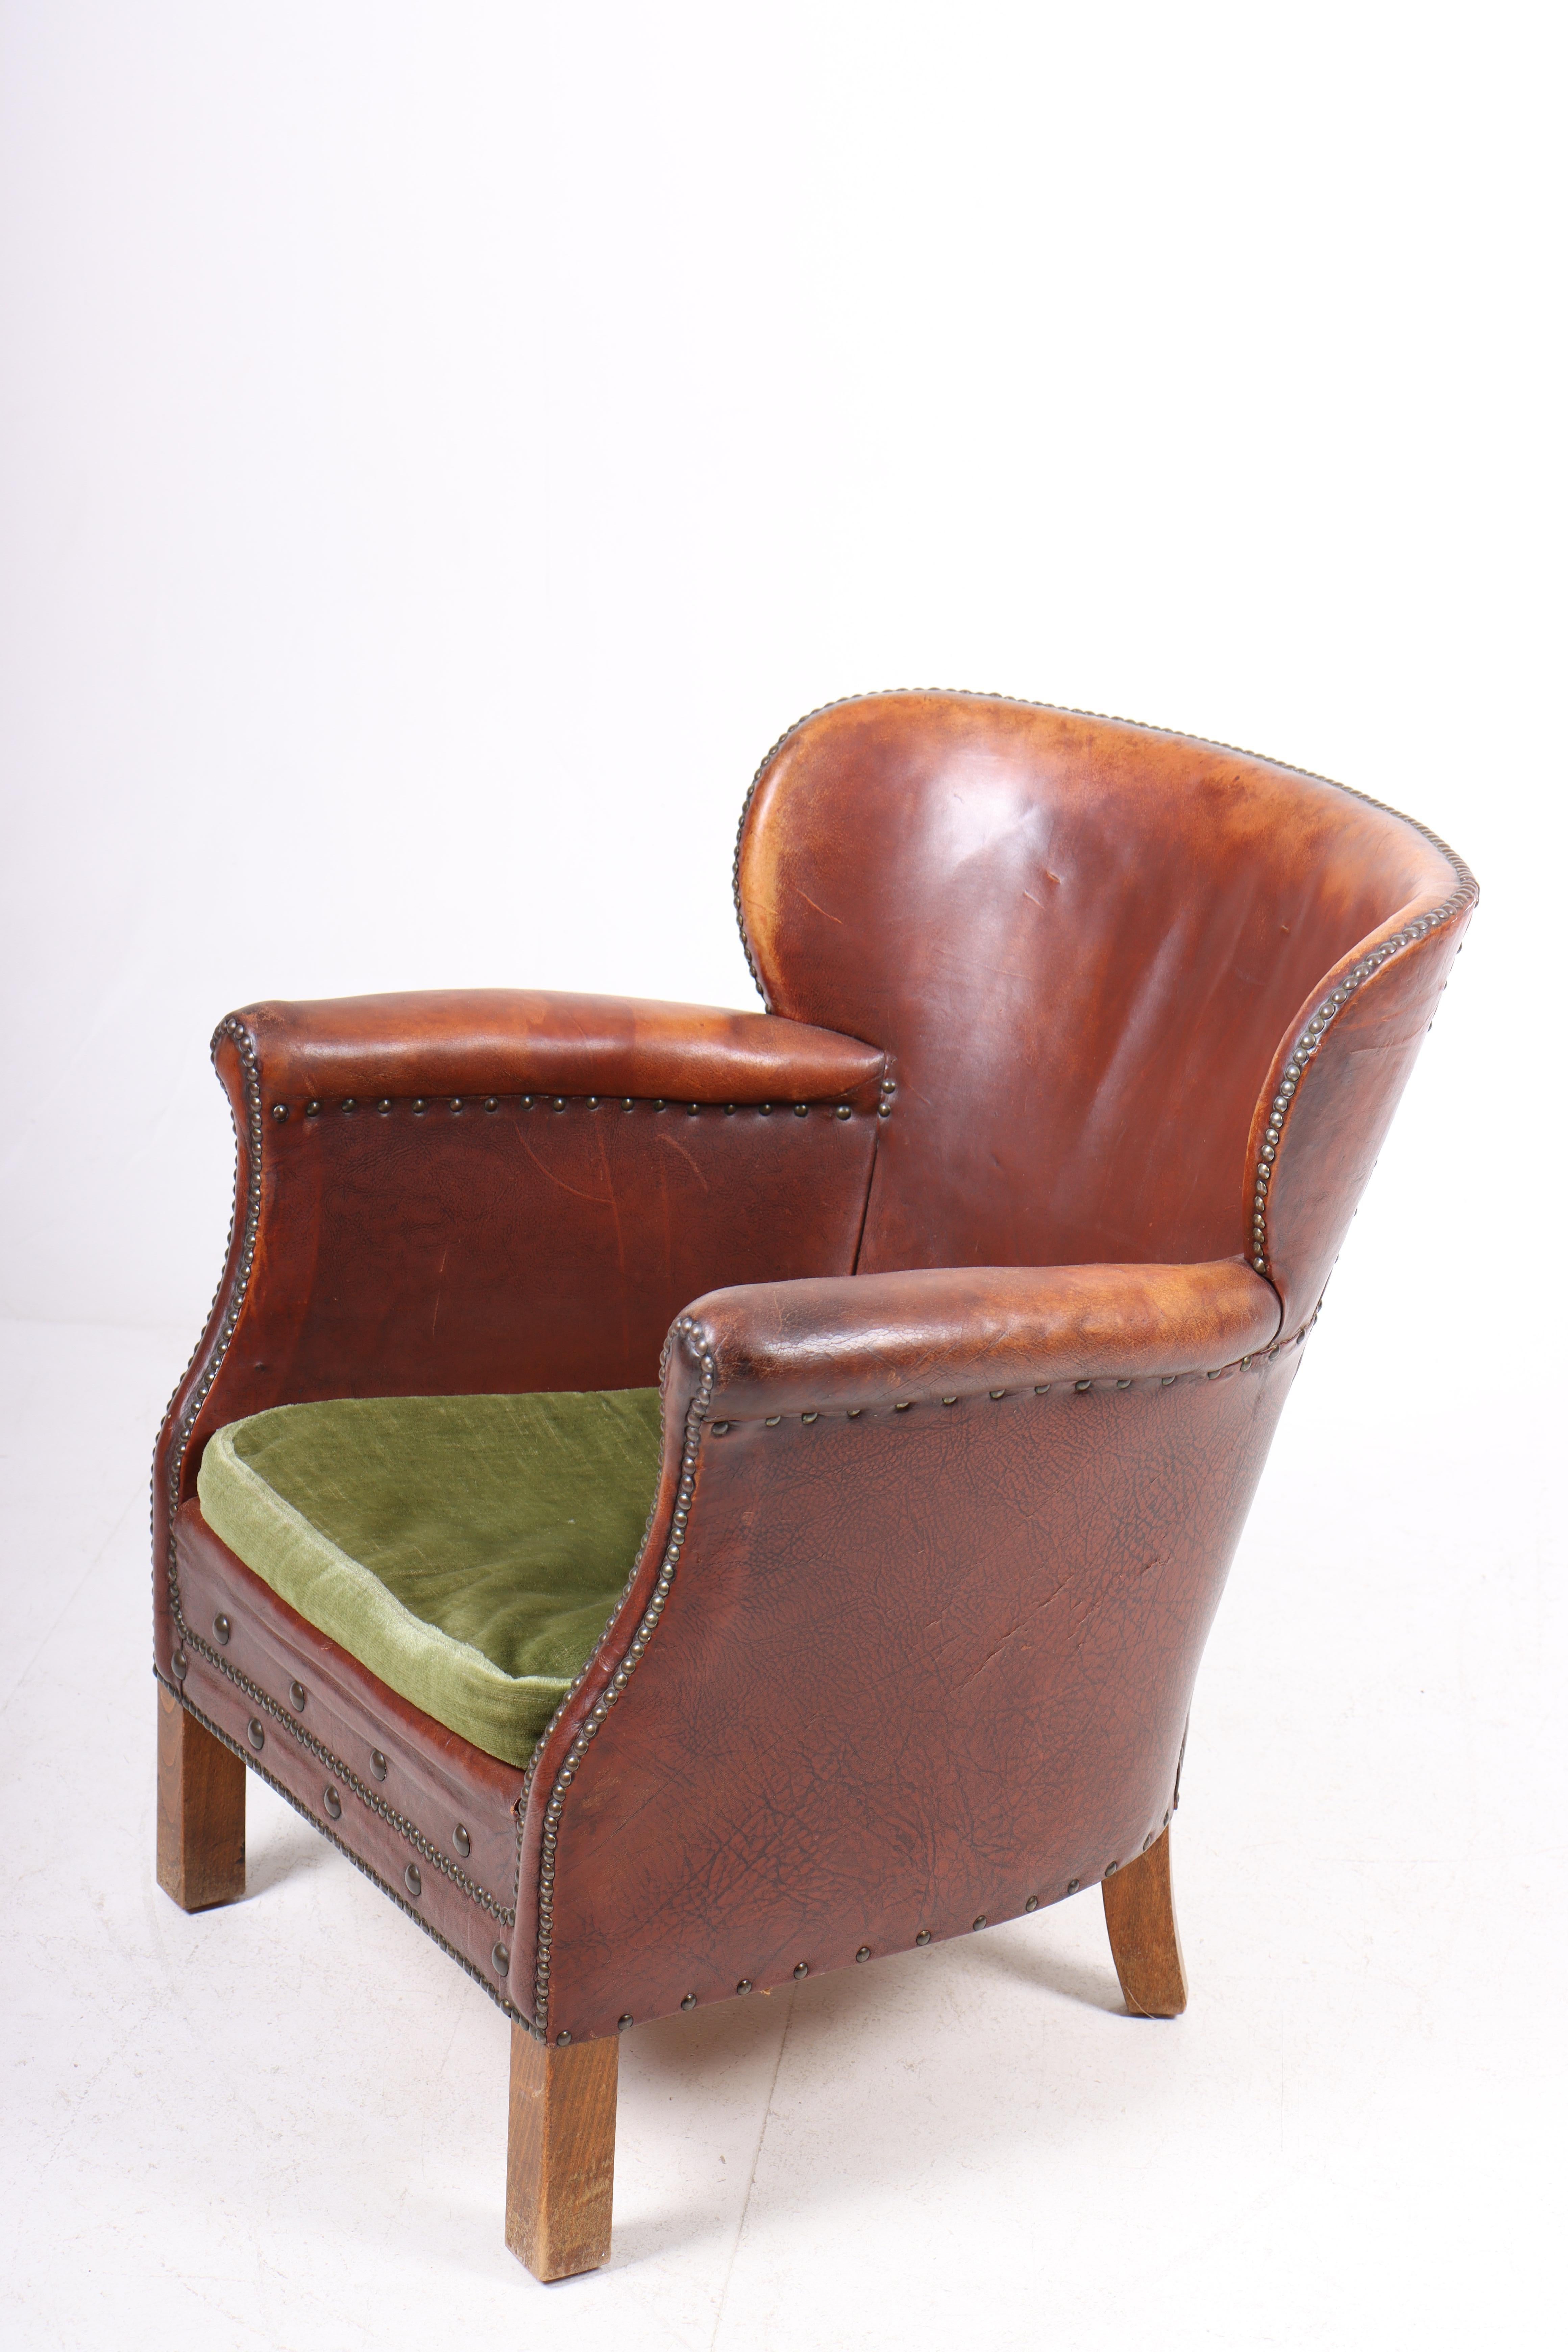 Swedish Lounge Chair in Patinated Leather, Made in Sweden 1940s